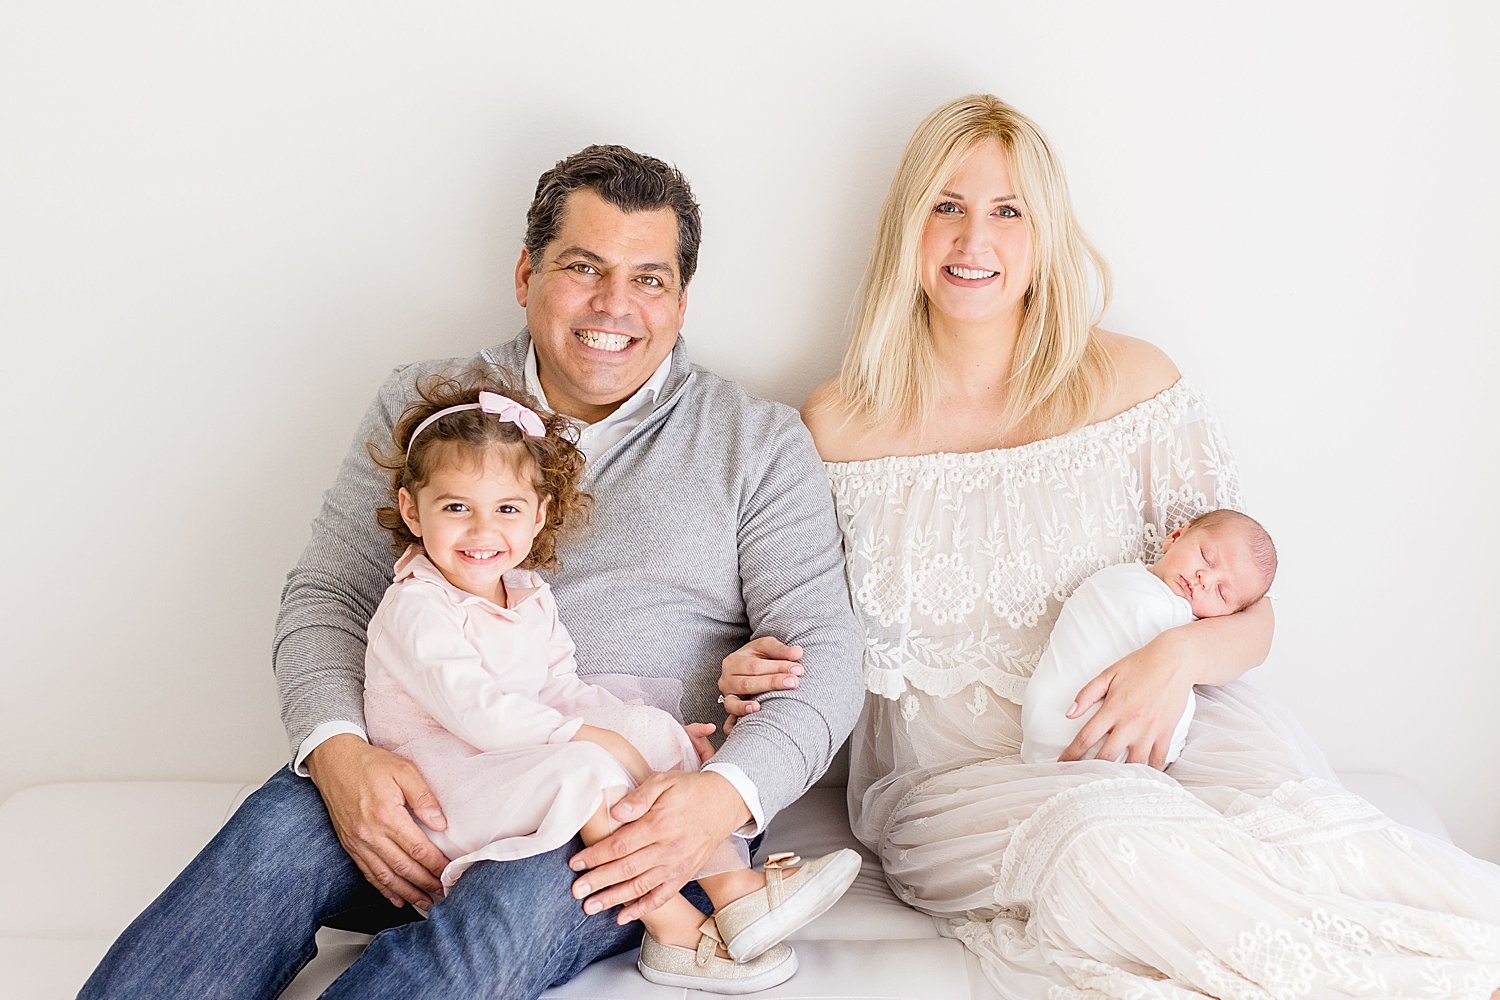 Family portraits during studio newborn sessino for baby boy | Ambre Williams Photography